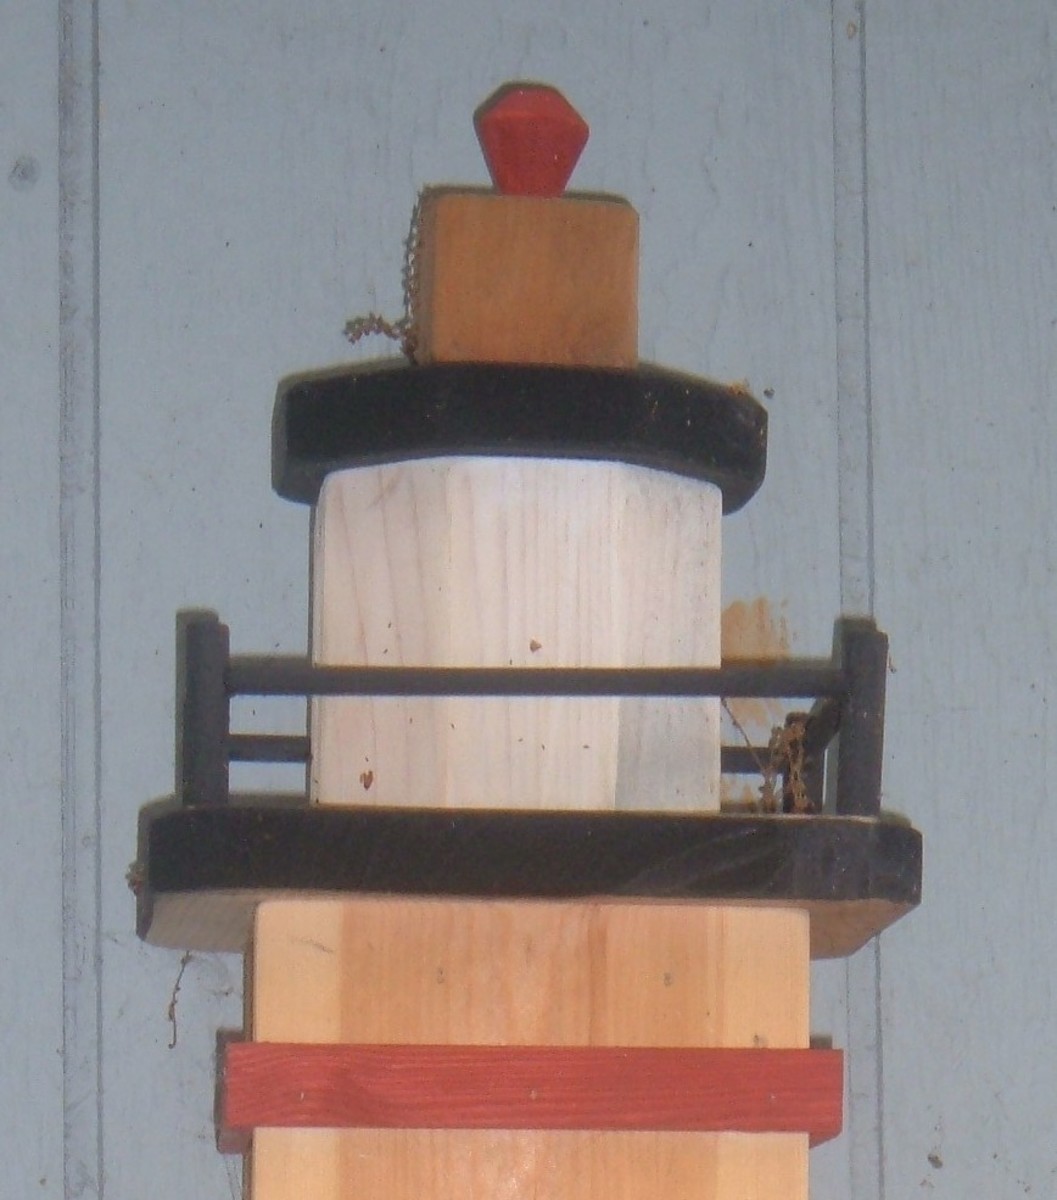 The completed turret sits on top of the lighthouse 